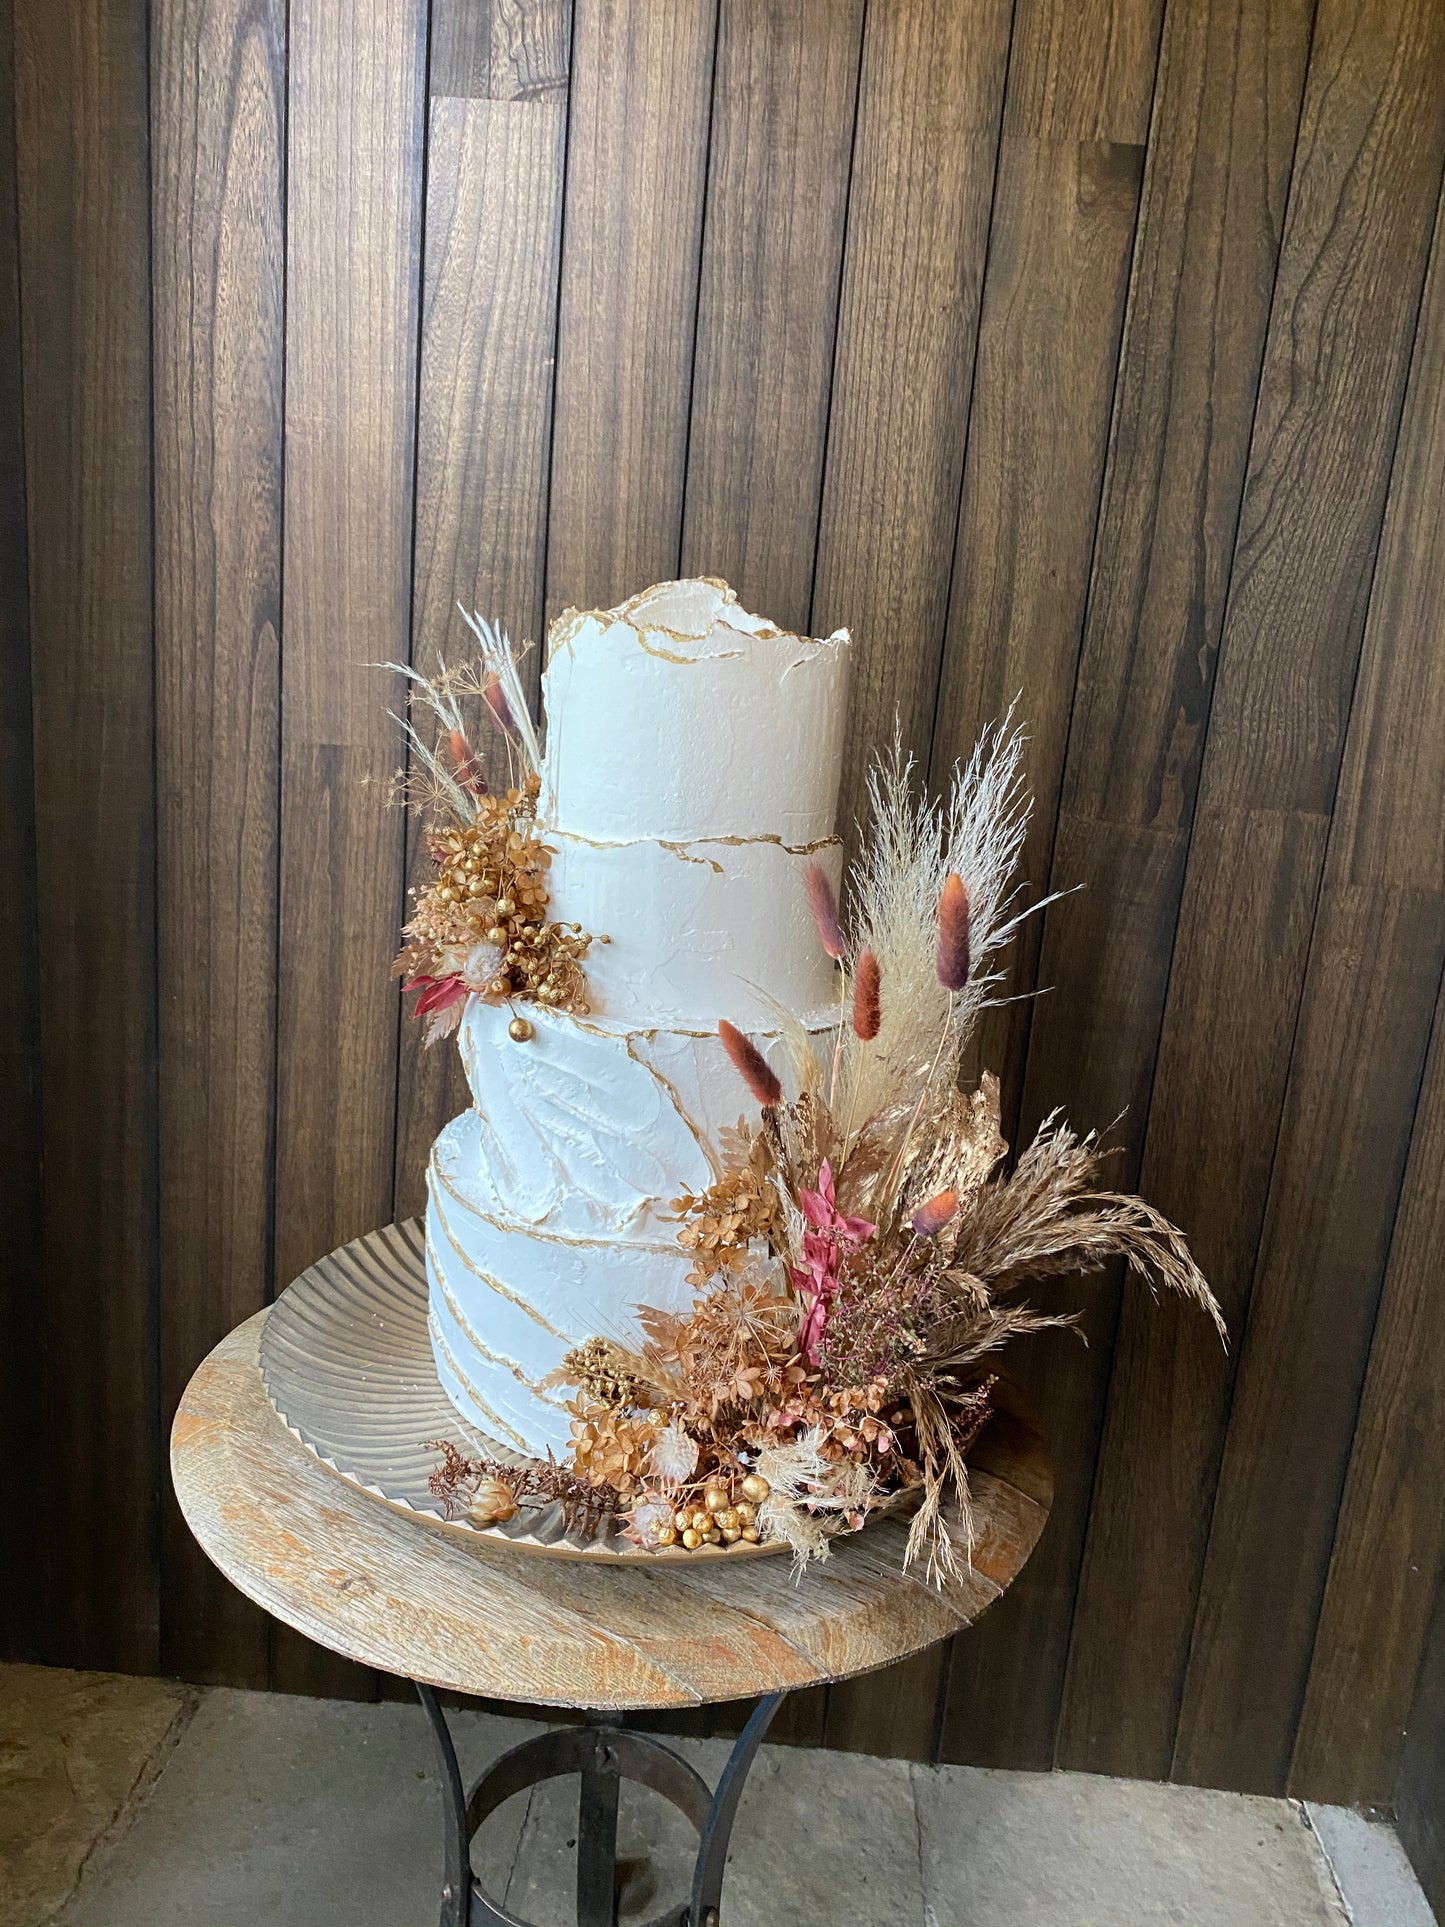 4 Tier Rustic Buttercream with Dried Flowers